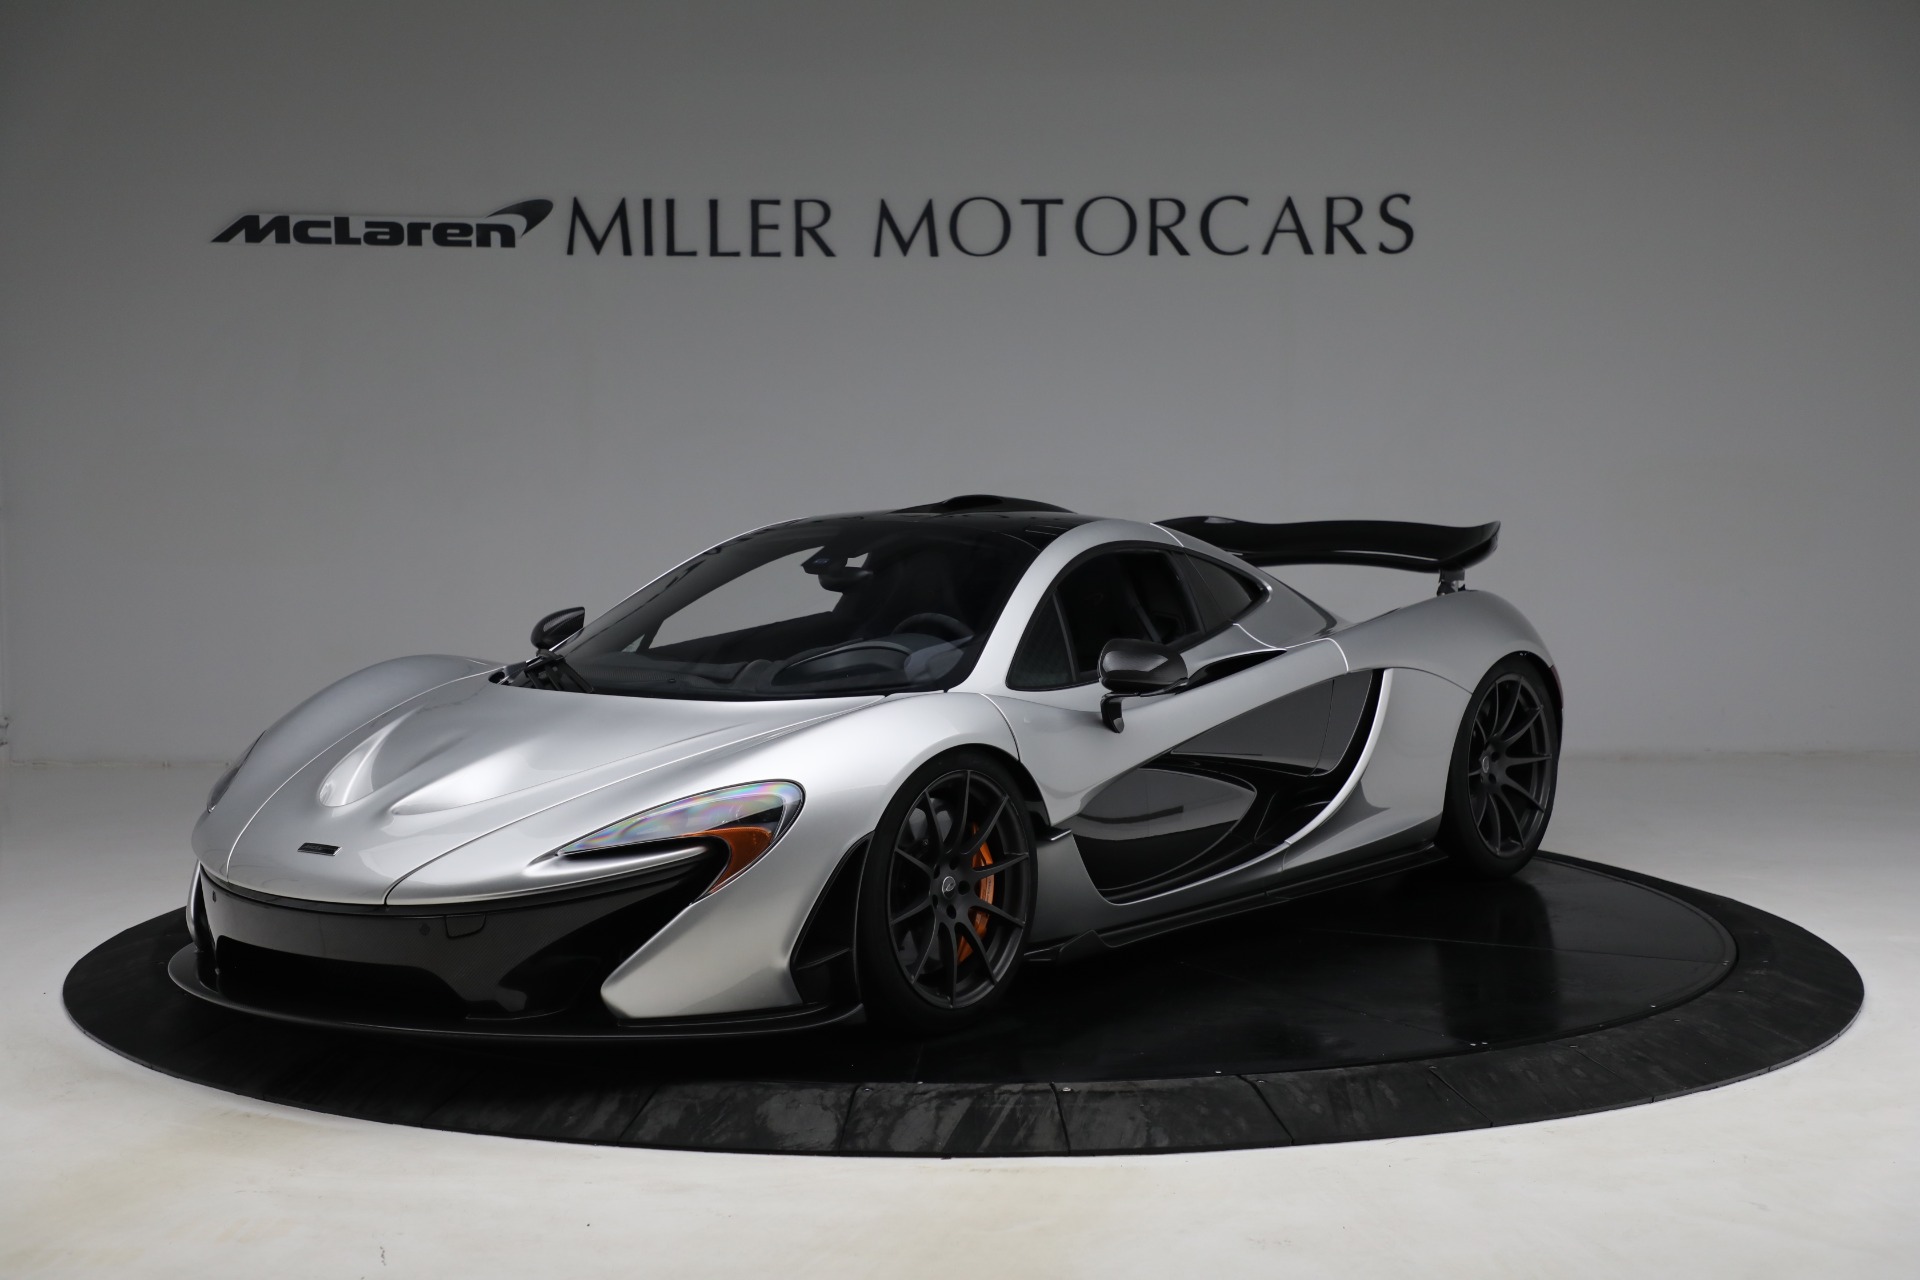 Used 2015 McLaren P1 for sale $1,825,000 at Rolls-Royce Motor Cars Greenwich in Greenwich CT 06830 1